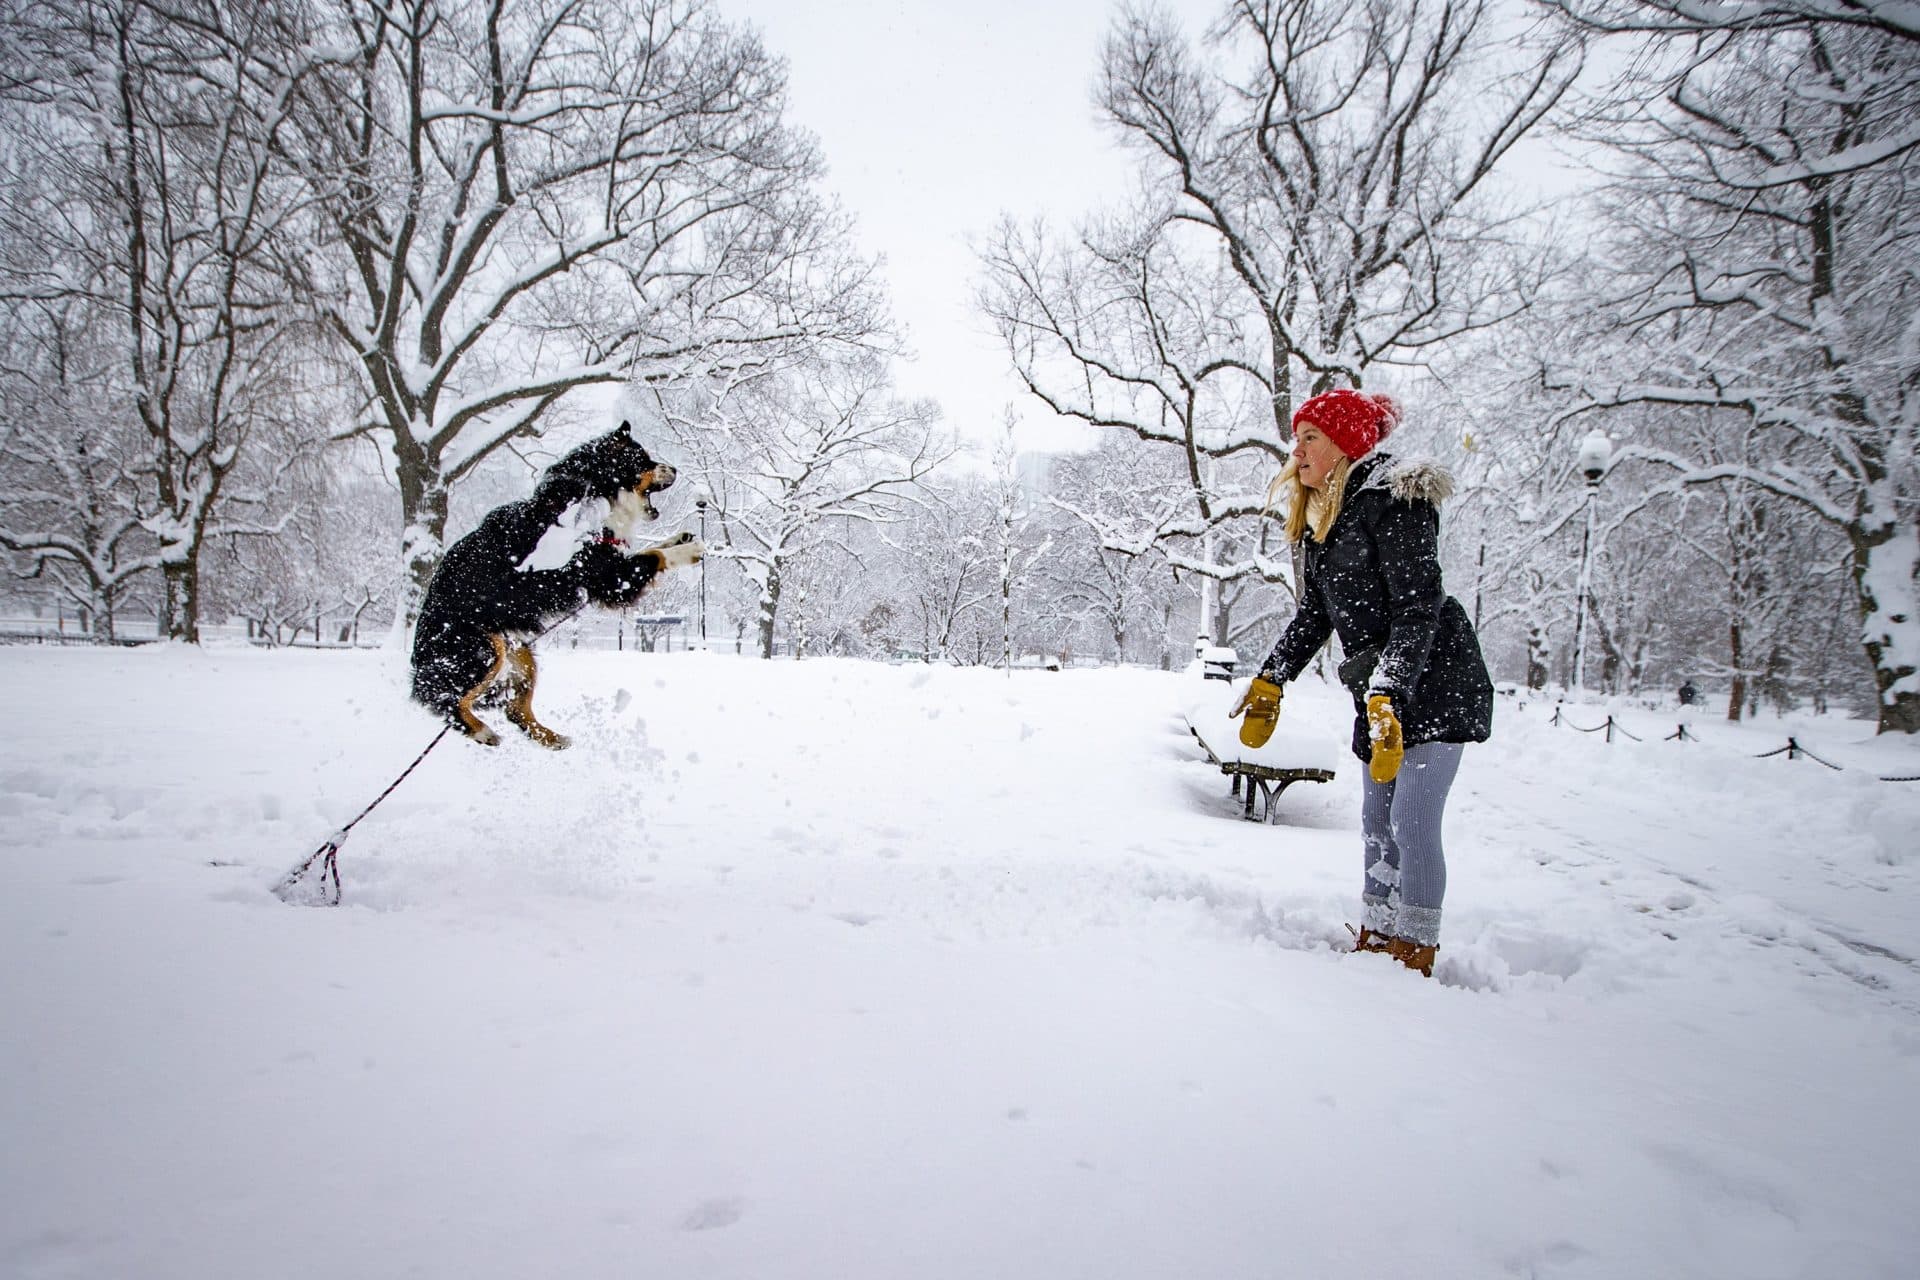 Wally leaps into the air to catch snow thrown by his owner Abby Kemp at the Boston Public Garden during the snowstorm. (Jesse Costa/WBUR)